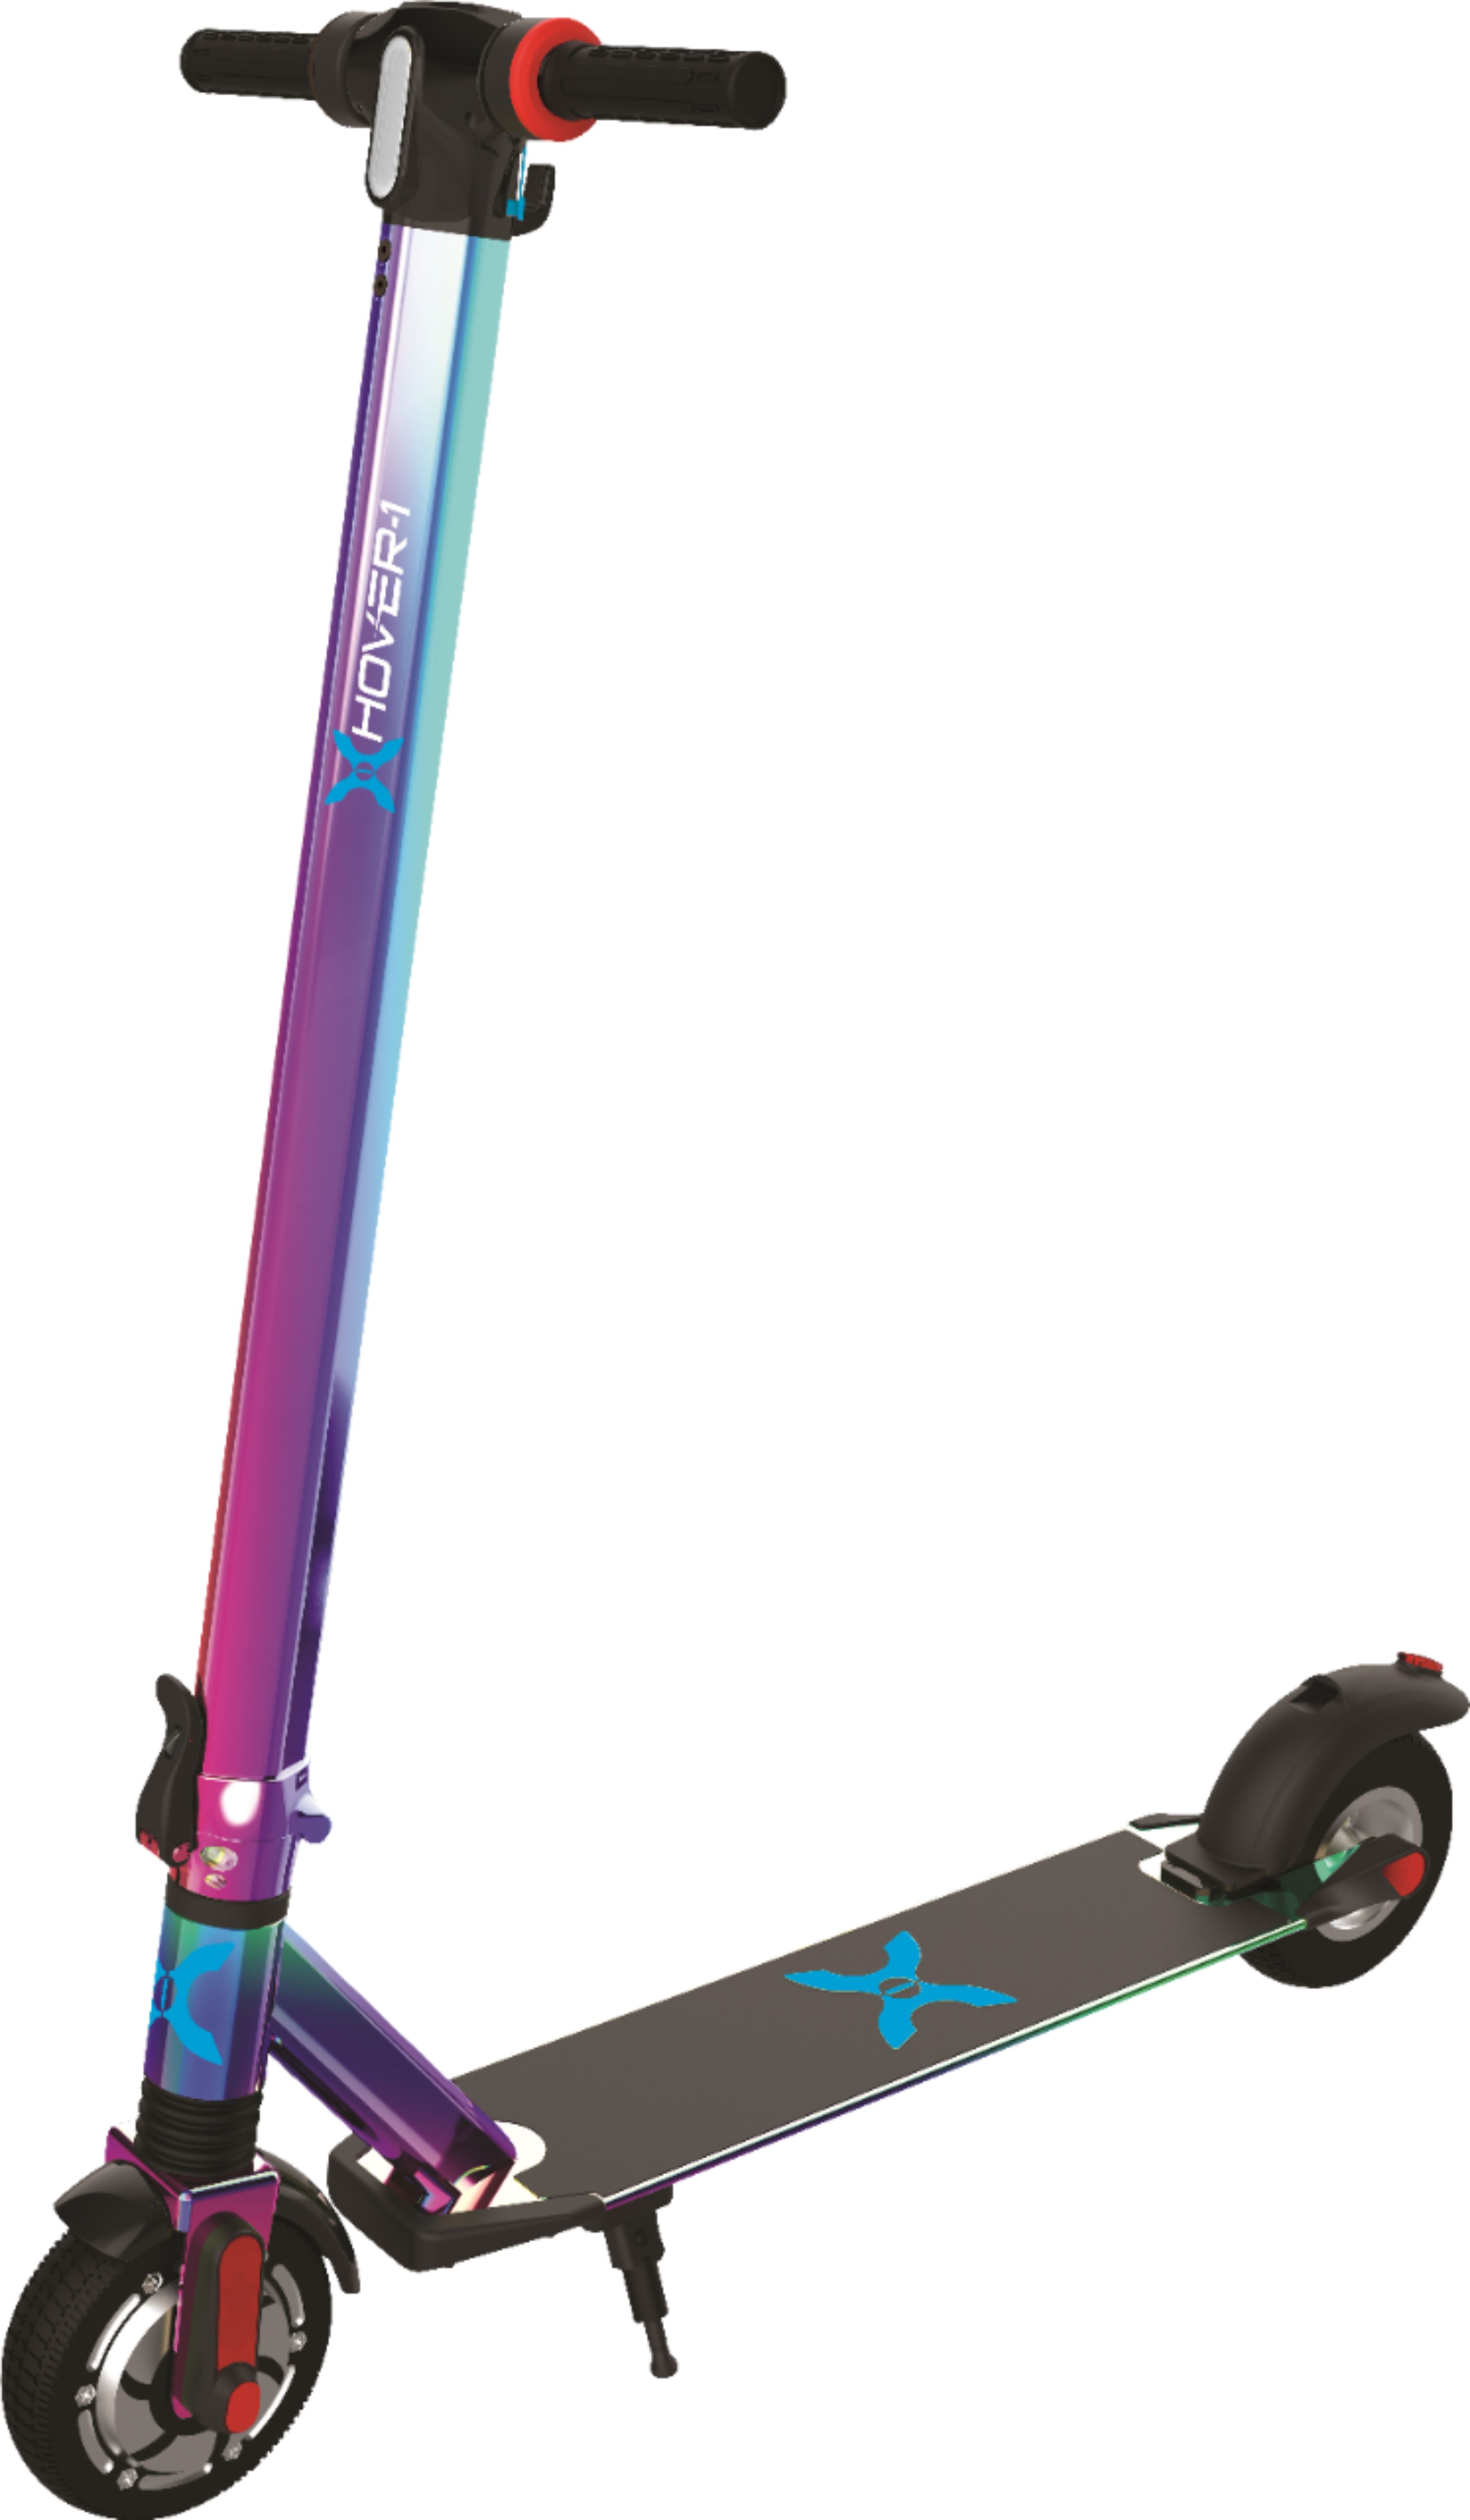 hover scooter